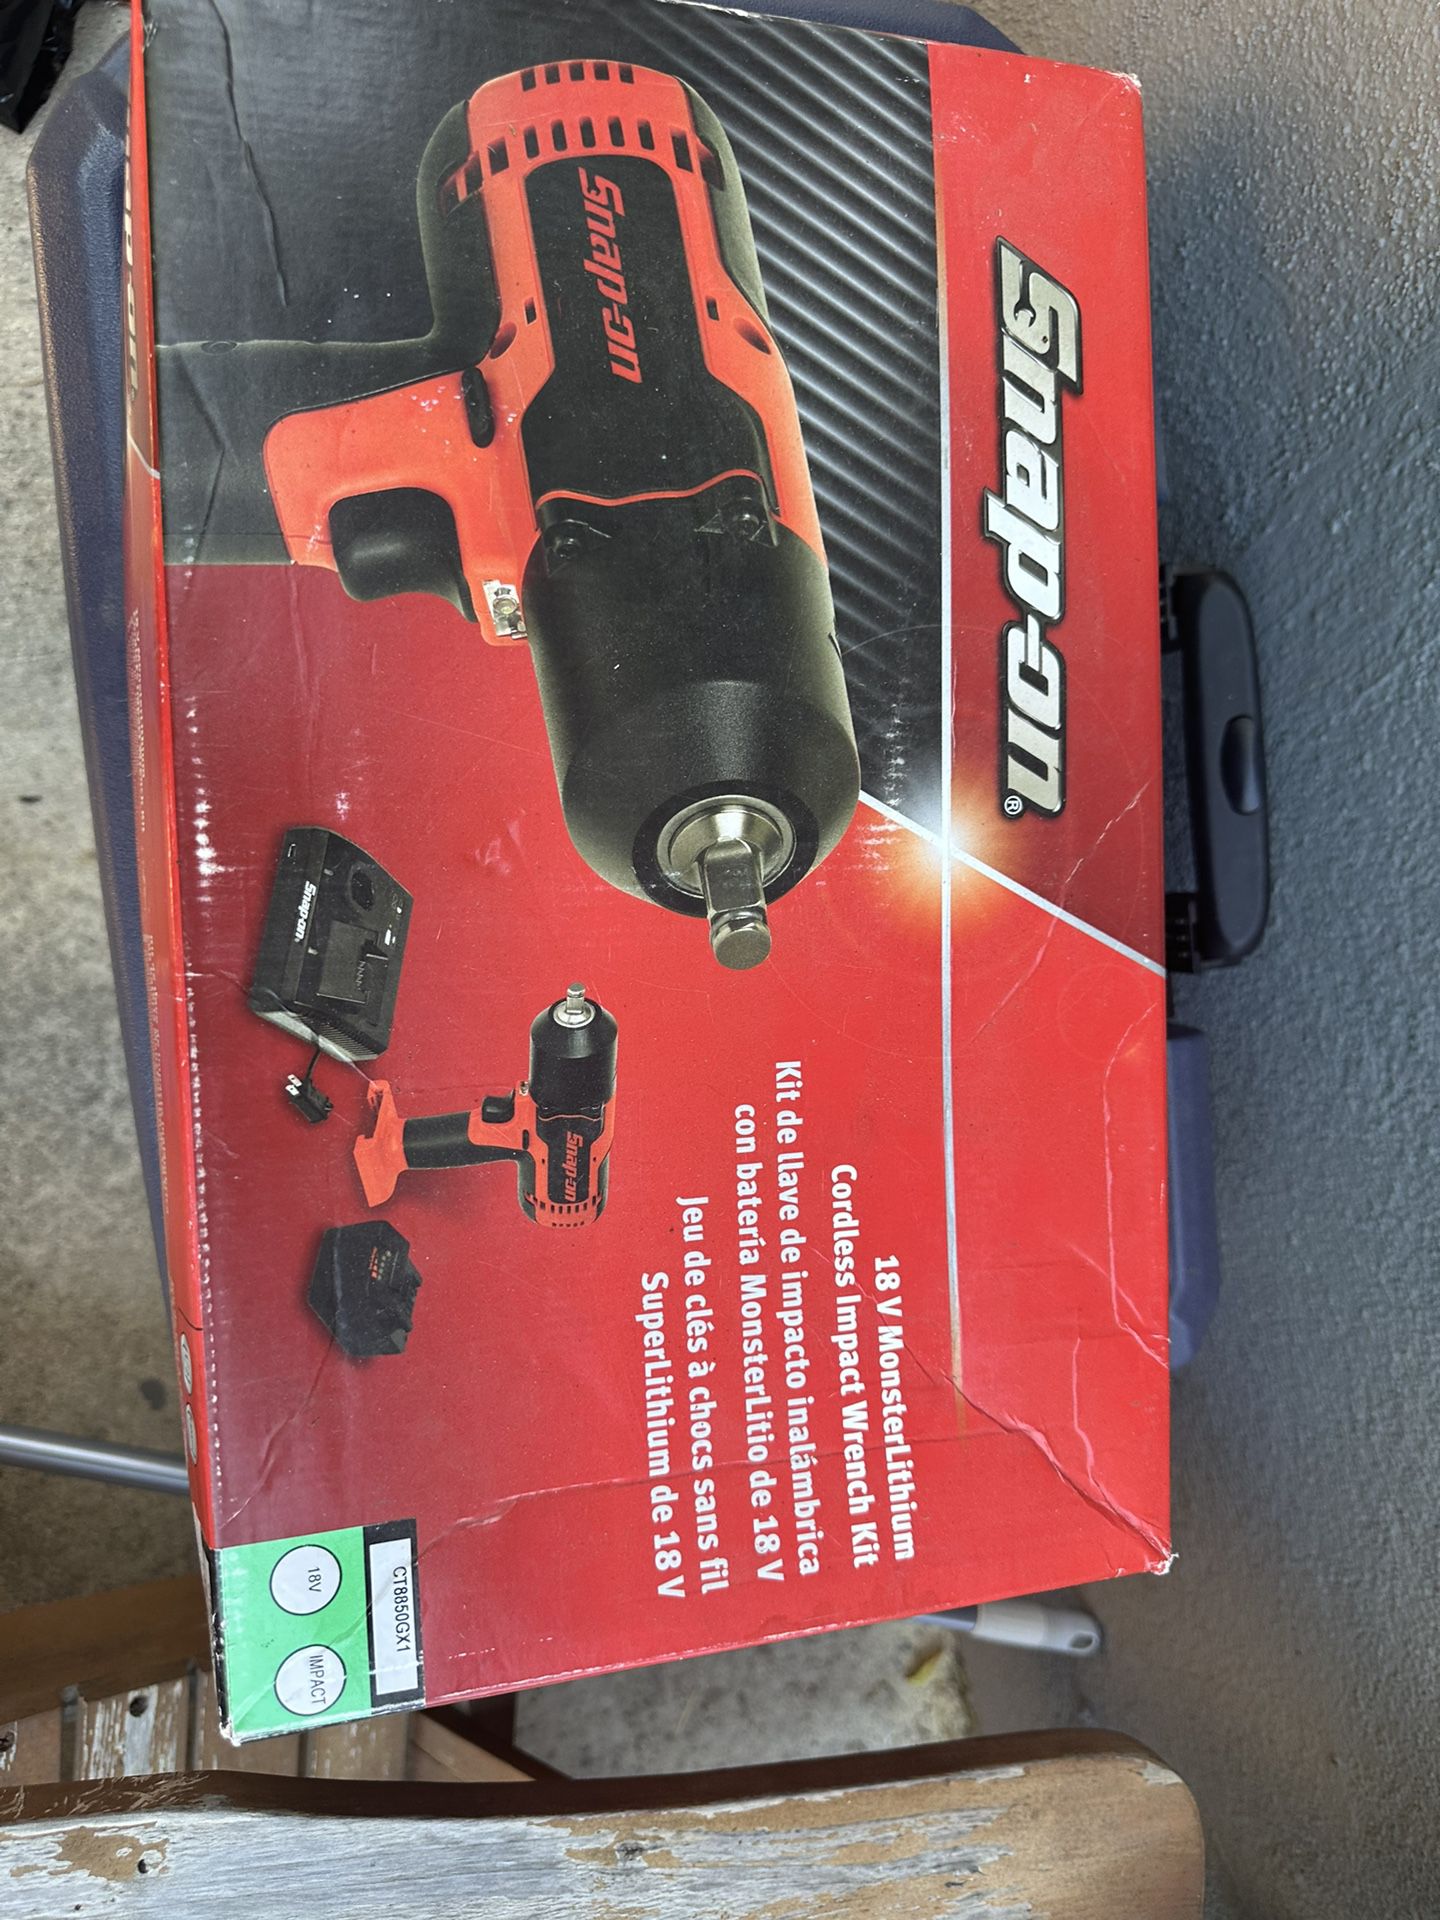 Snap On  Impact Wrench 